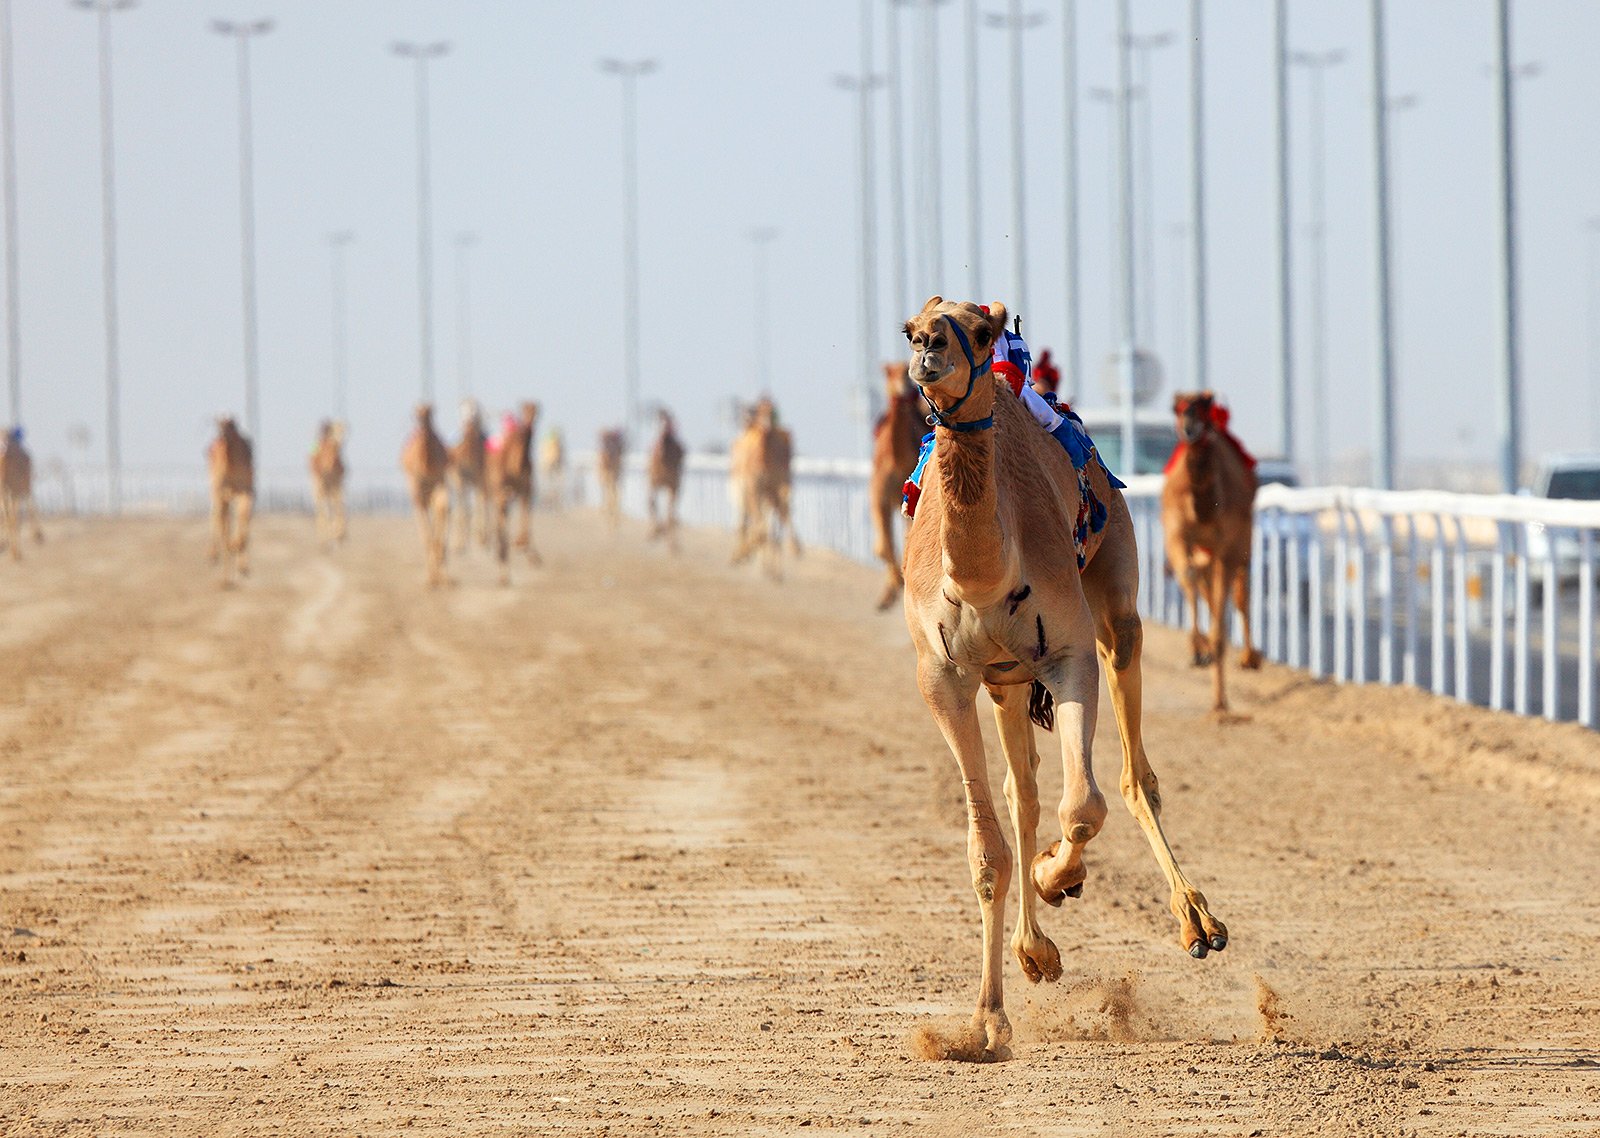 How to see Camel Races in Dubai